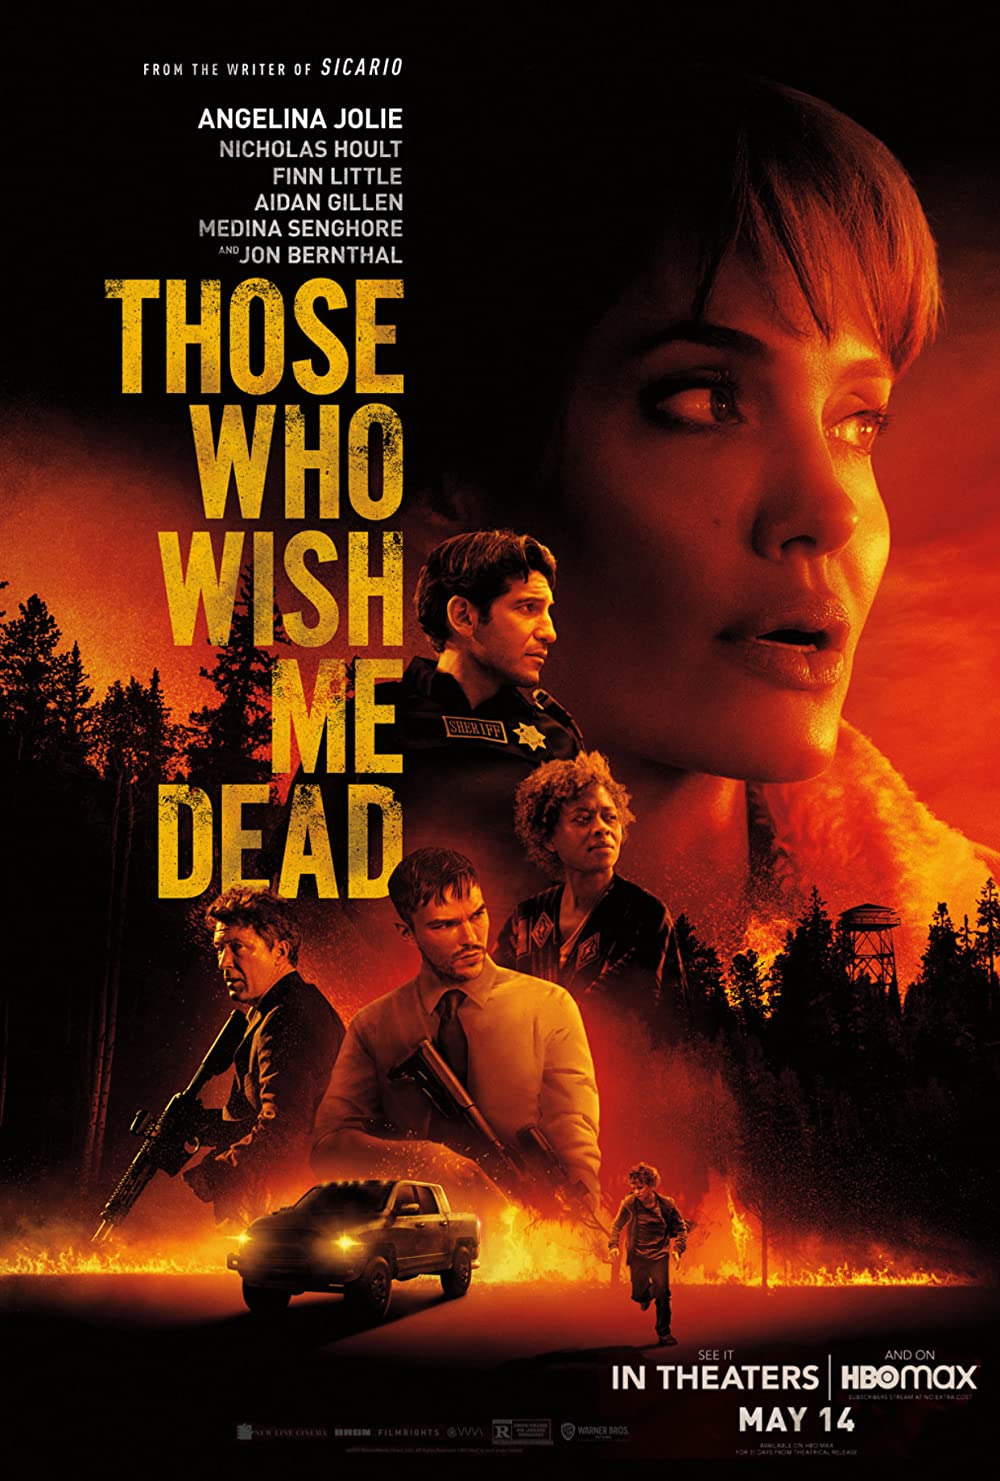 Those Who Wish Me Dead DVD Release Date | Redbox, Netflix ...